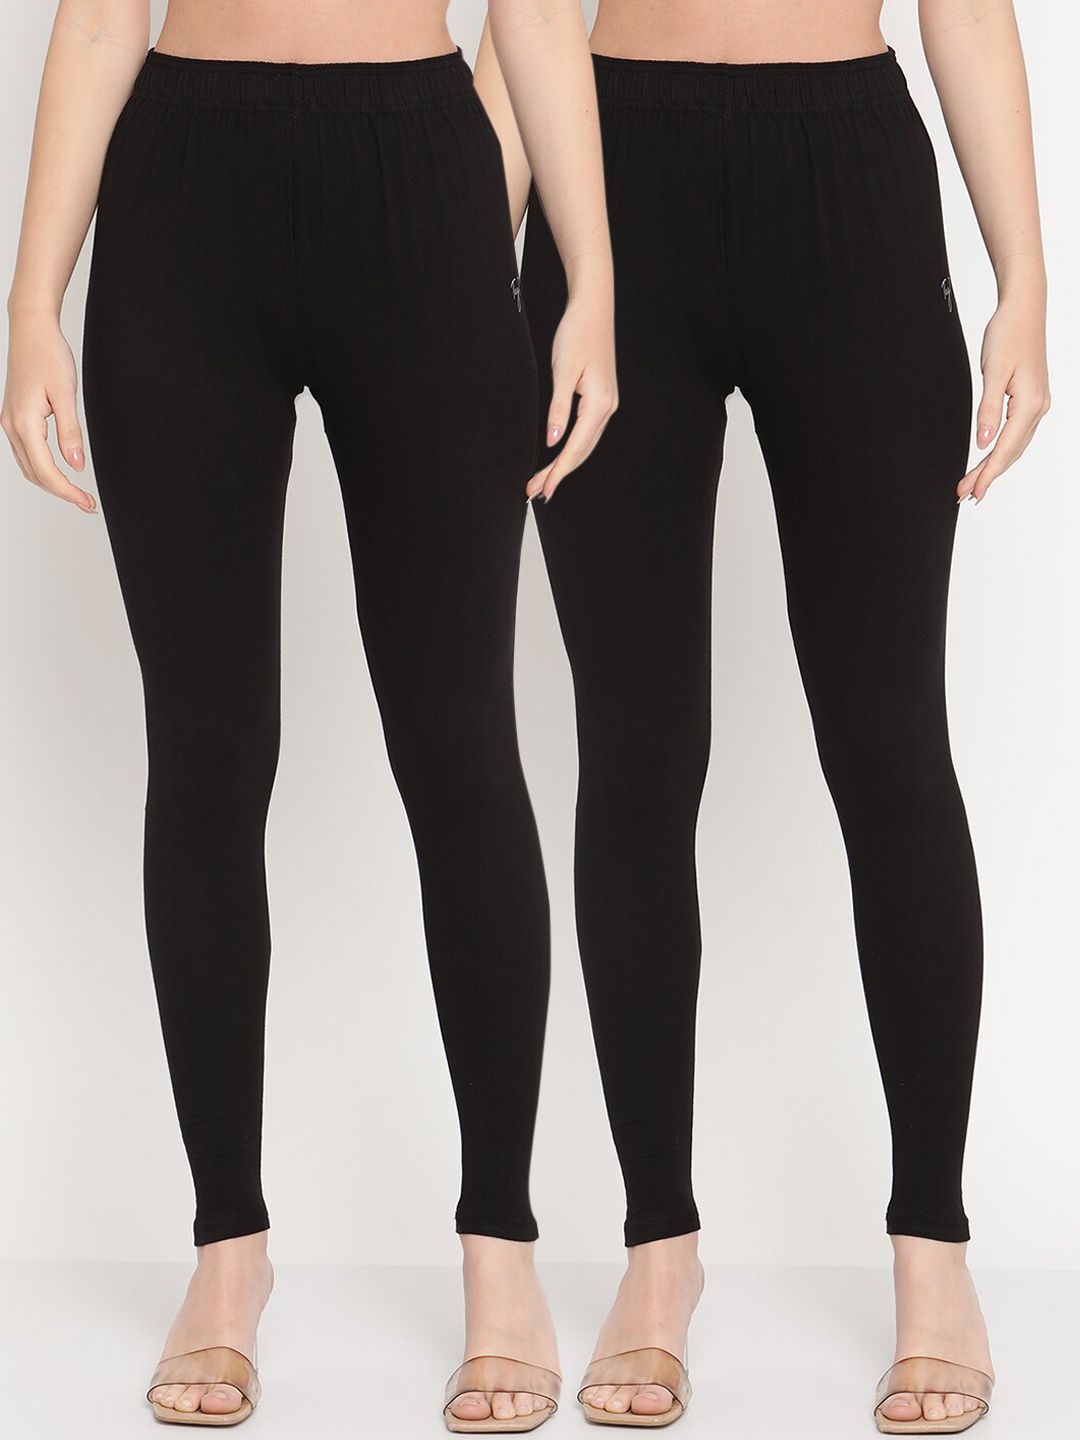 TAG 7 Pack of 2 Black Ankle Length Leggings Price in India